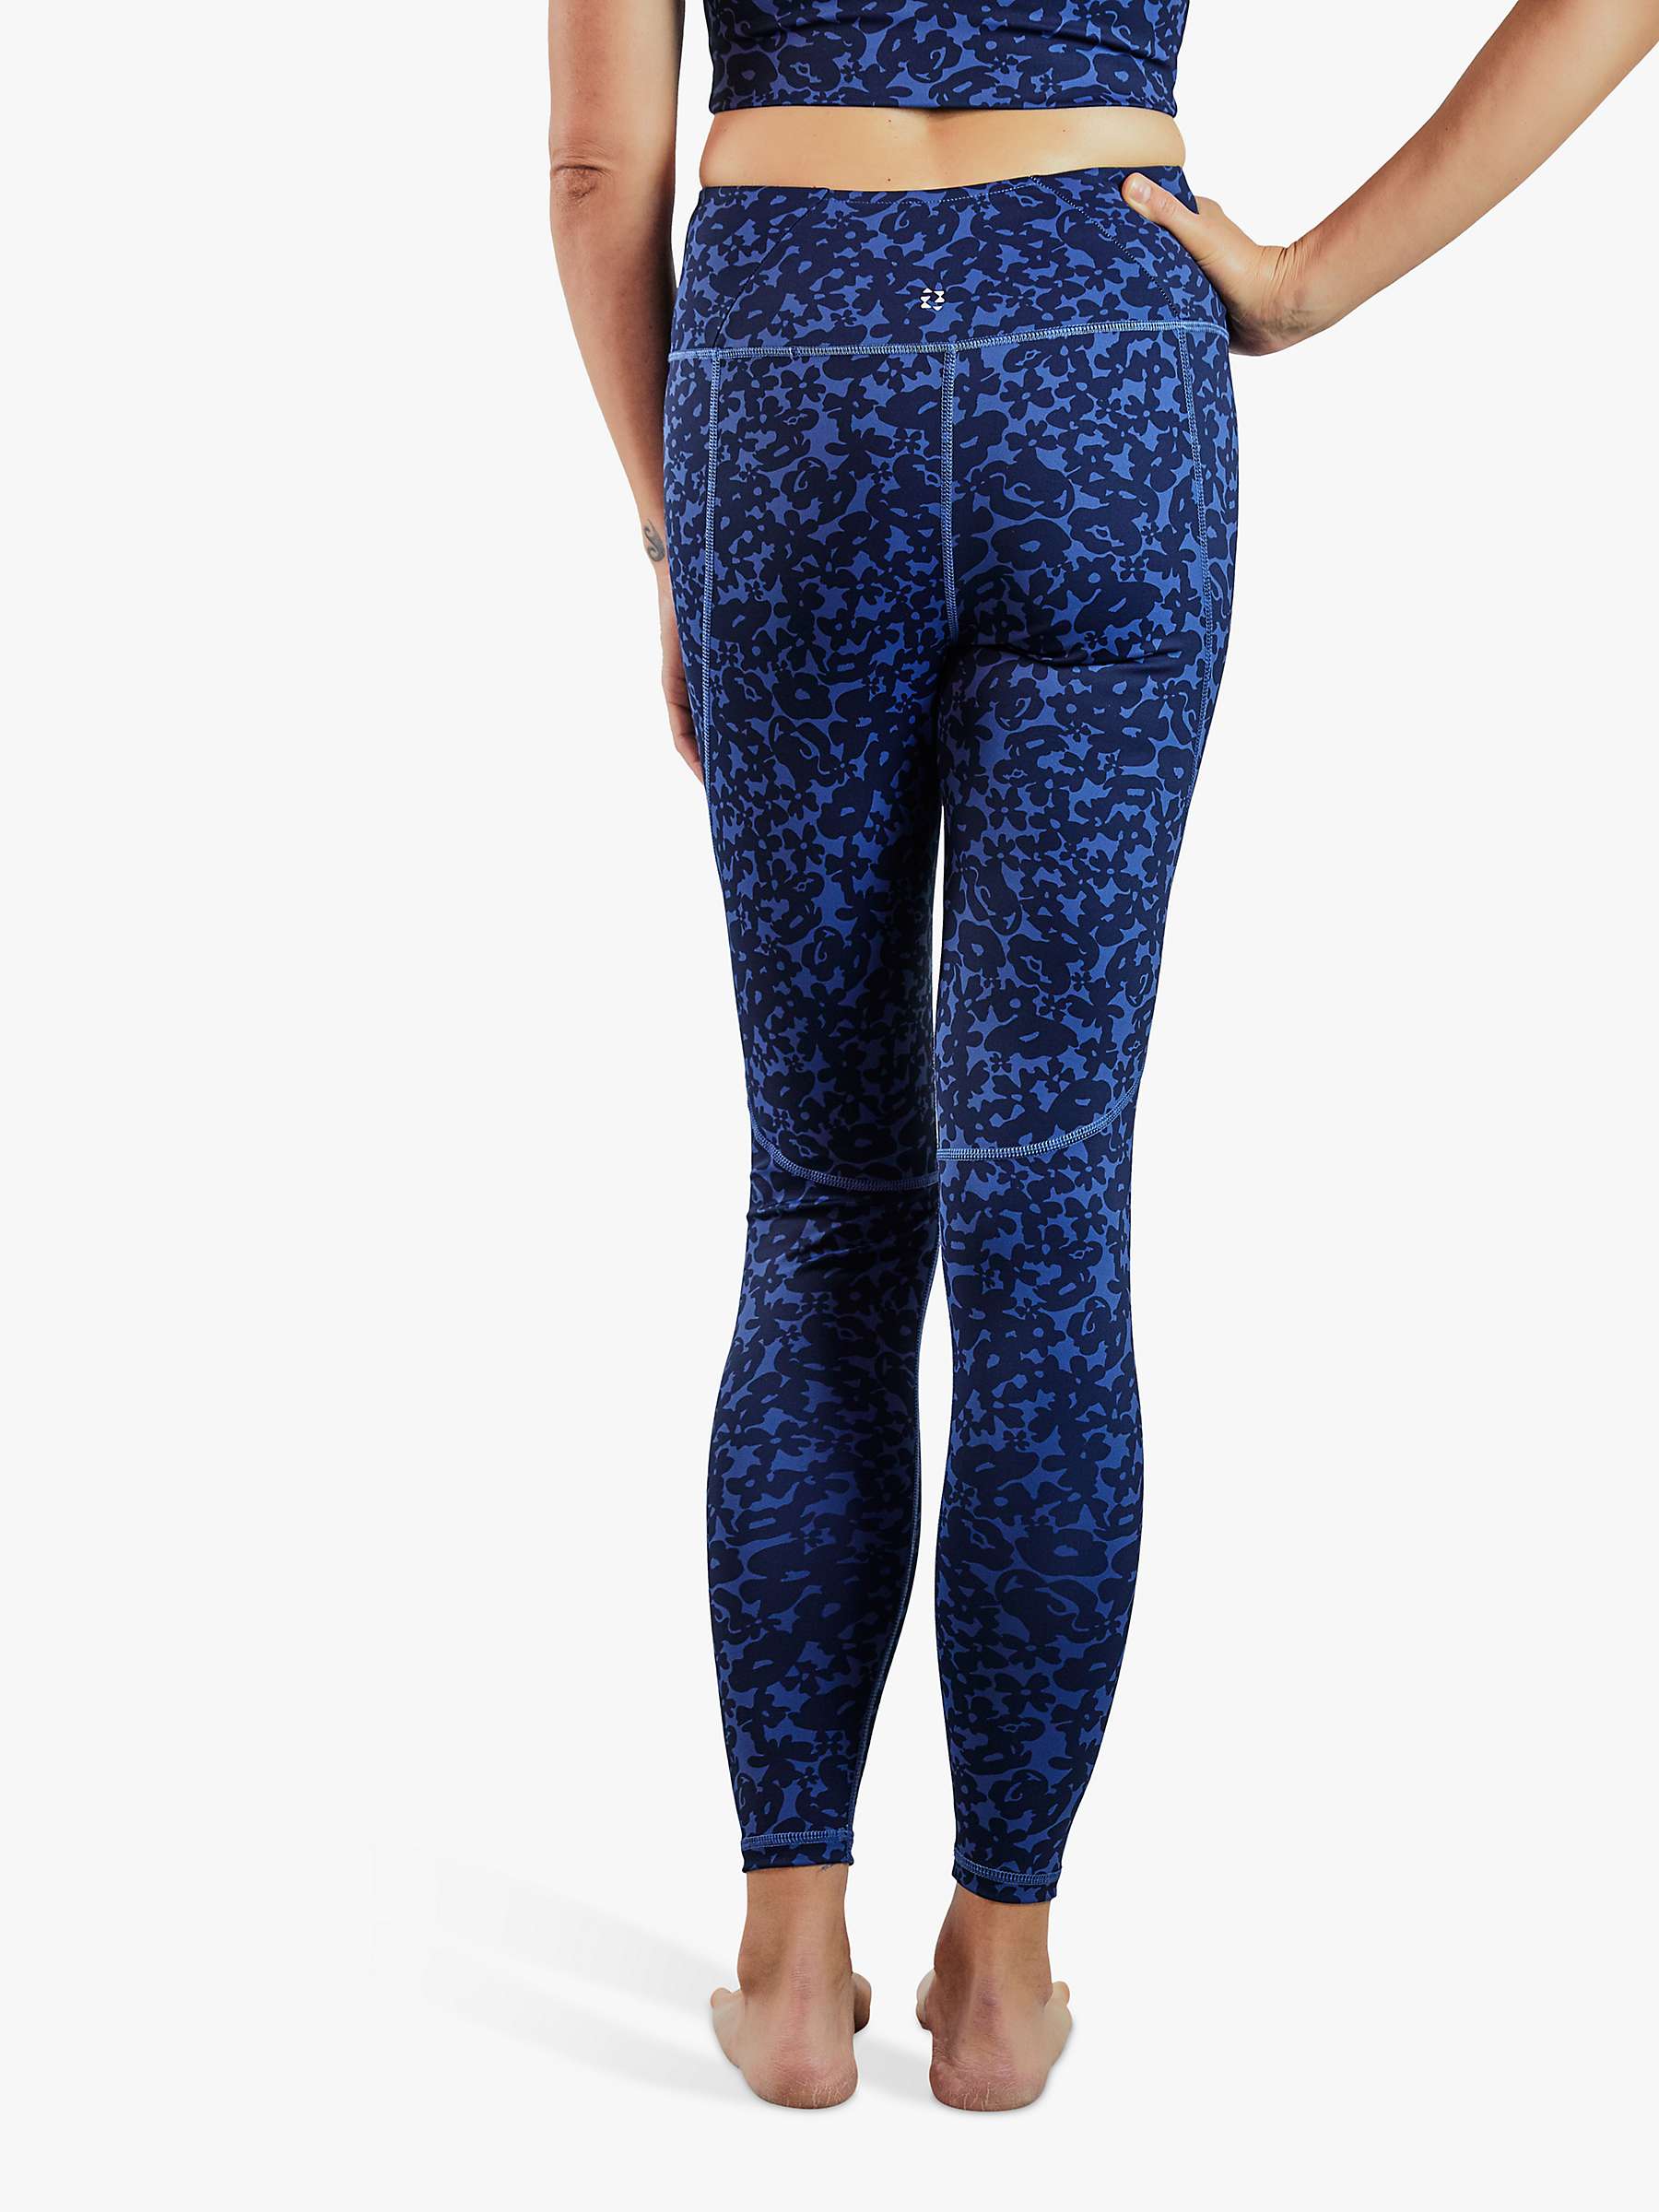 Buy Zozimus Ultimate Printed High Waisted Leggings, Floral Energy Online at johnlewis.com